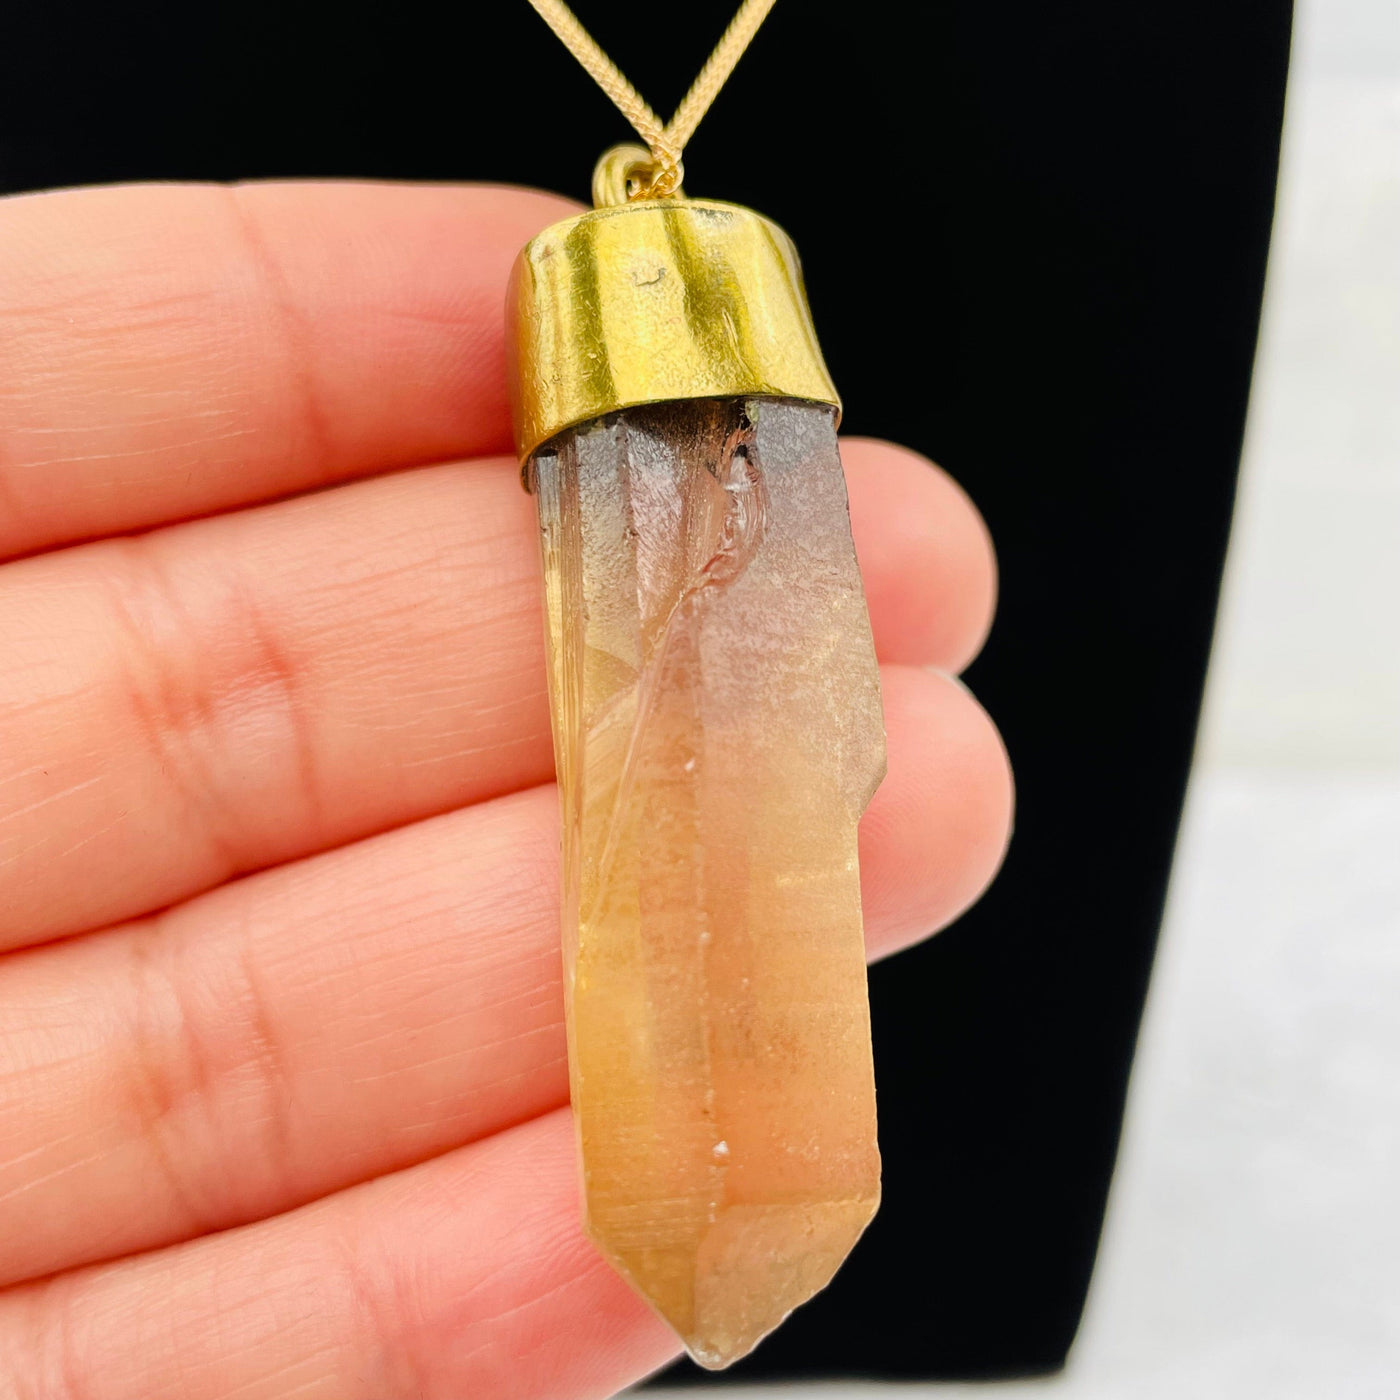  African Citrine Gold Necklace in hand for size reference 